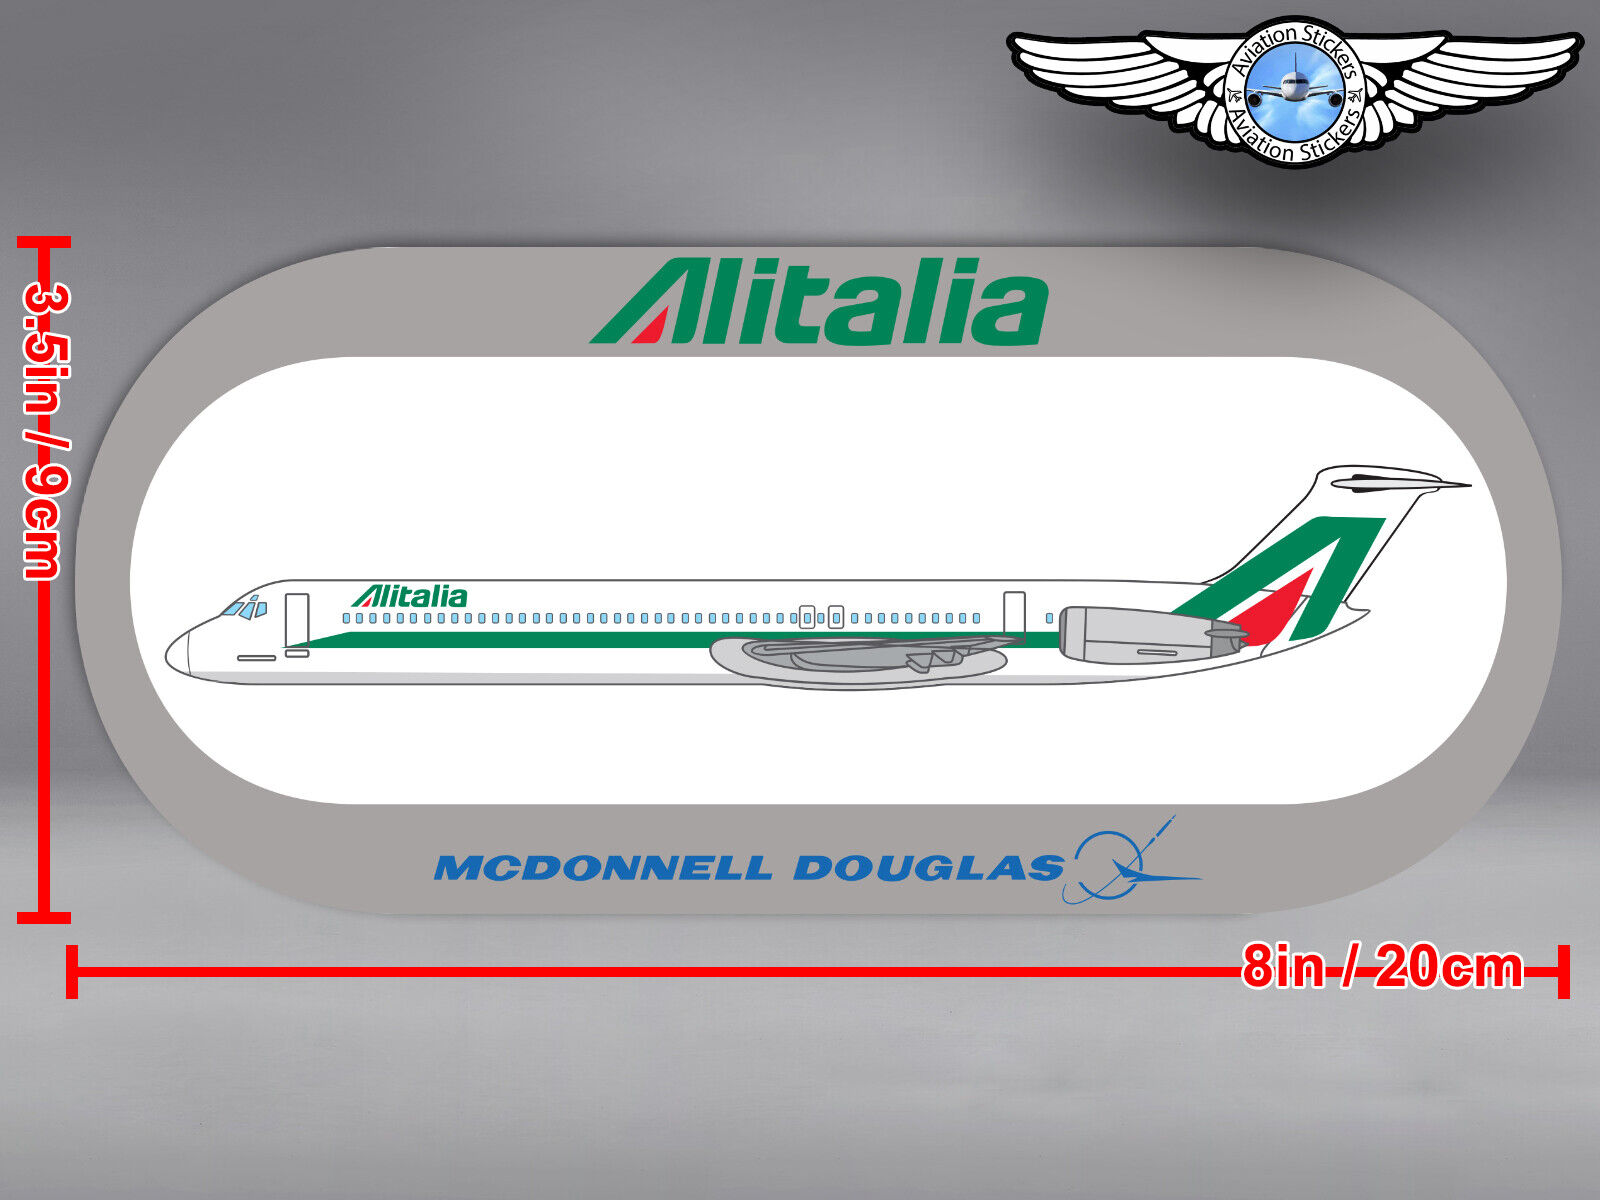 ALITALIA ROUNDED RECTANGULAR MCDONNELL DOUGLAS MD80 MD 80 STICKER DECAL